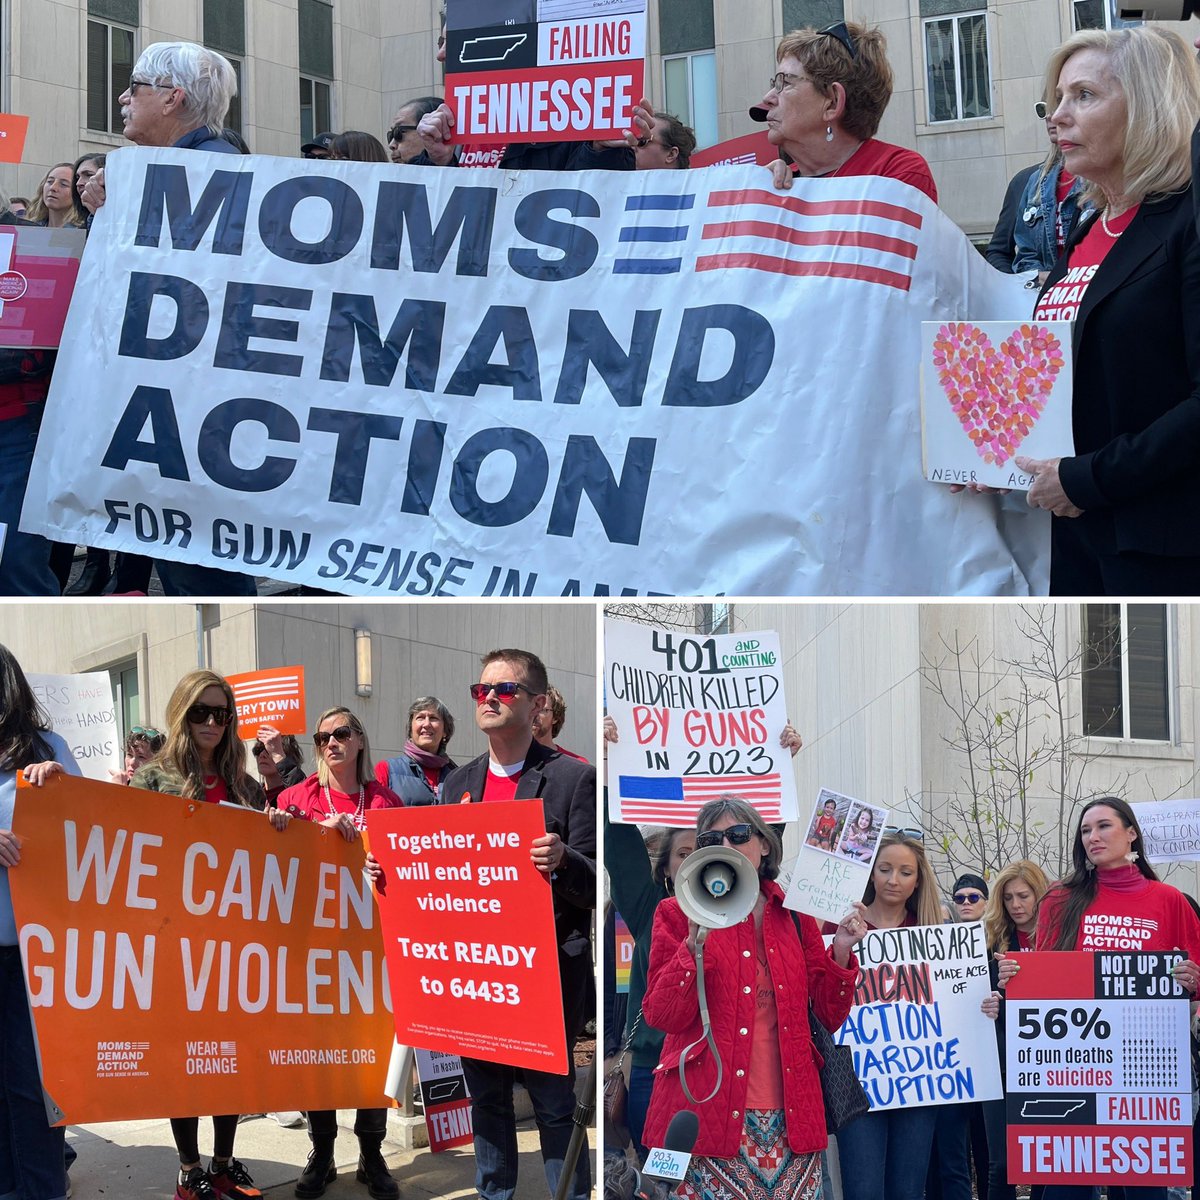 As Tennessee lawmakers call off hearings on 2 new gun bills, @MomsDemand hold a rally on Capitol Hill demanding action to end gun violence and limit access to firearms in the Volunteer State. @WSMV